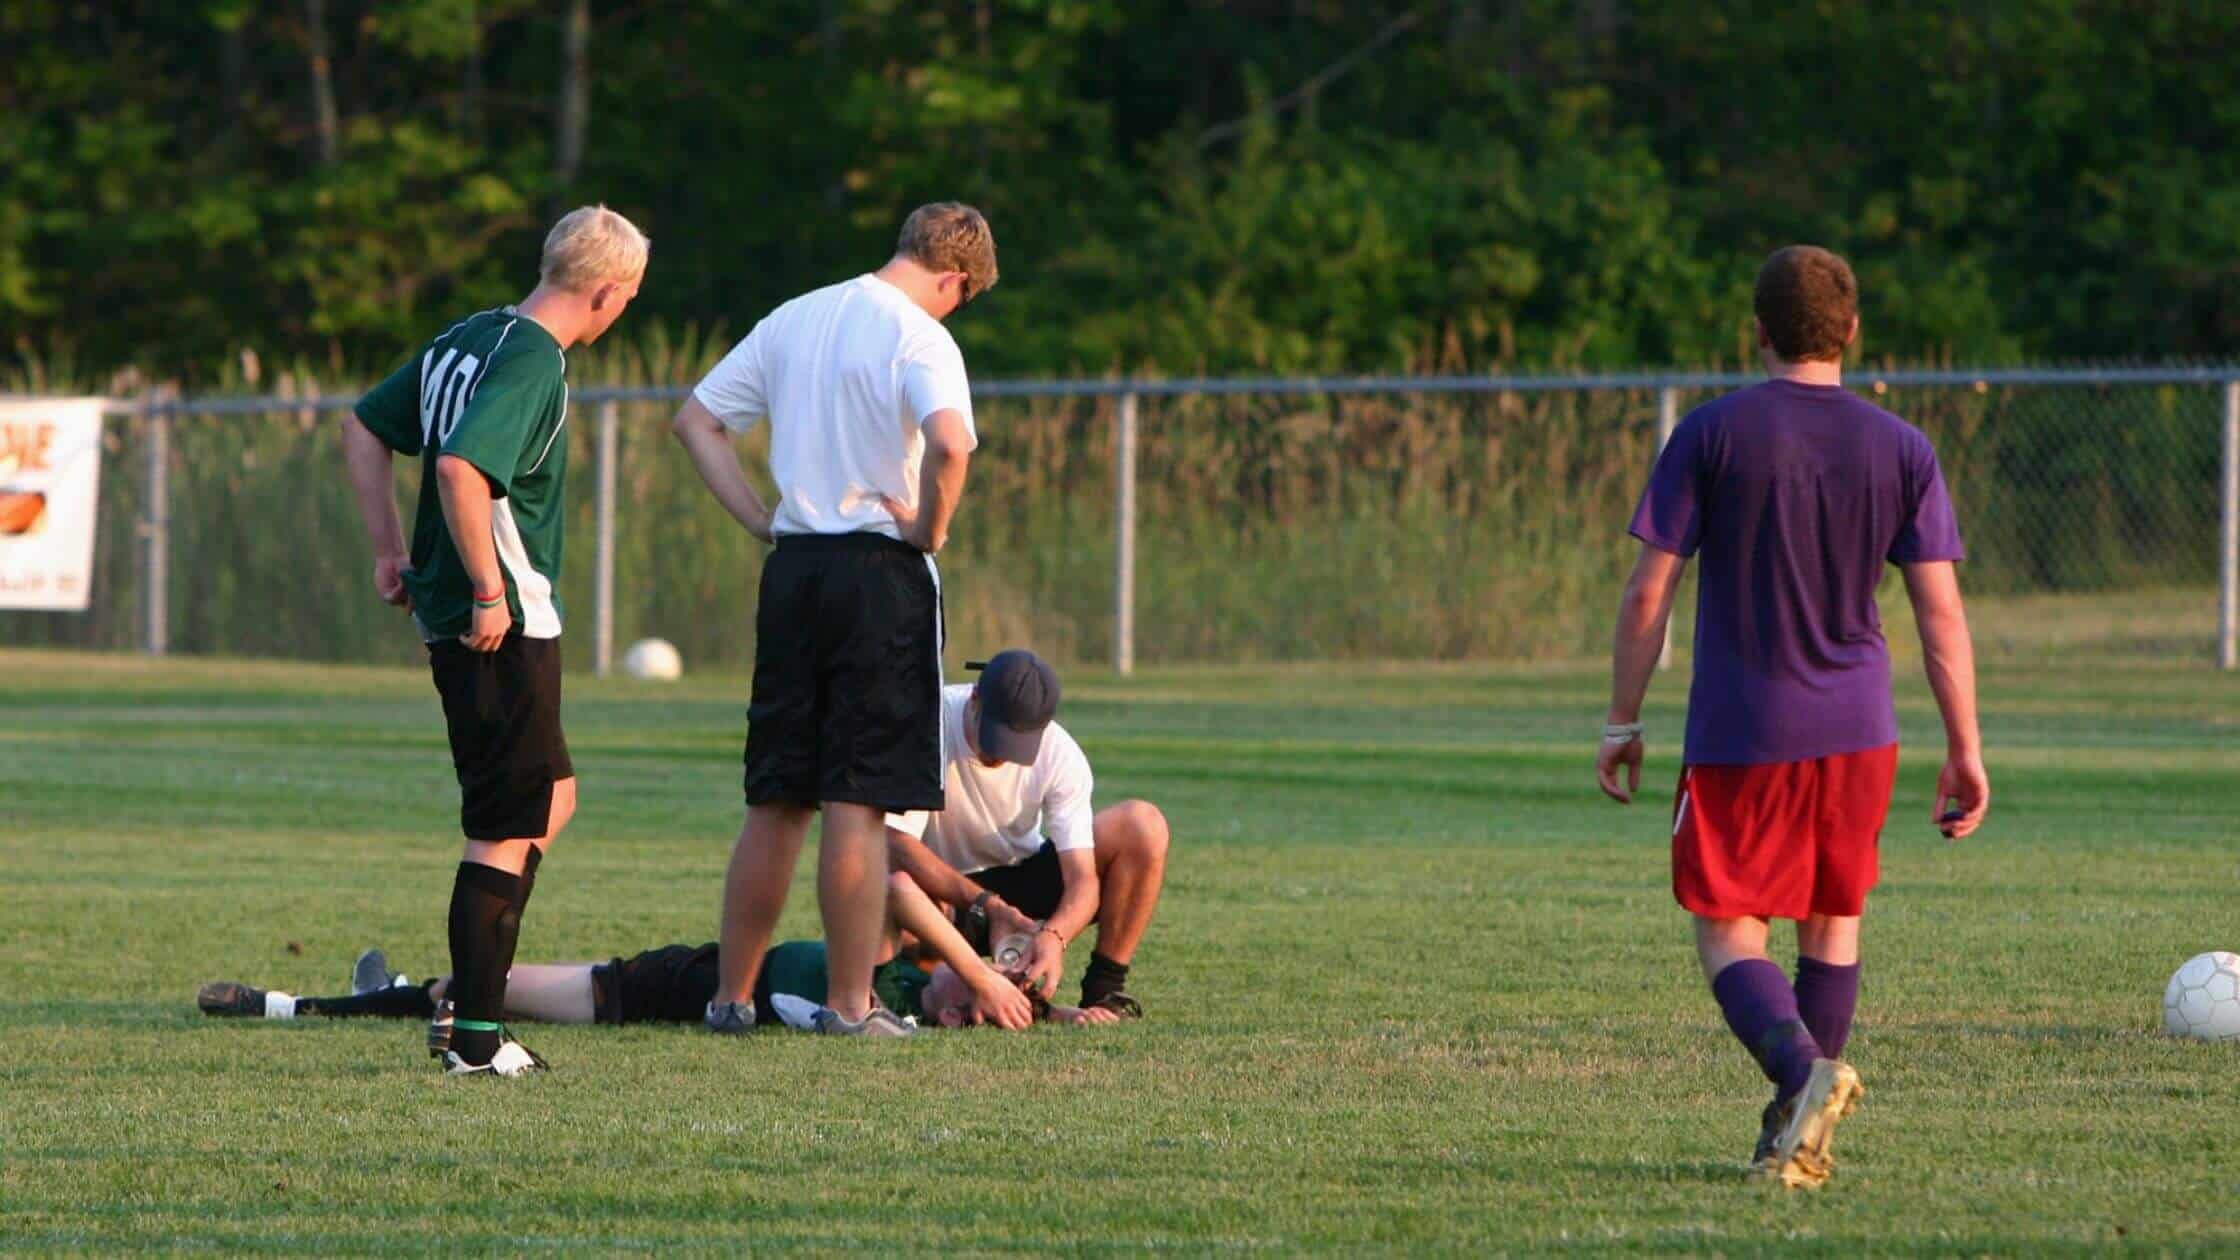 Restart Of School Sports| Know The Symptoms Of A Concussion